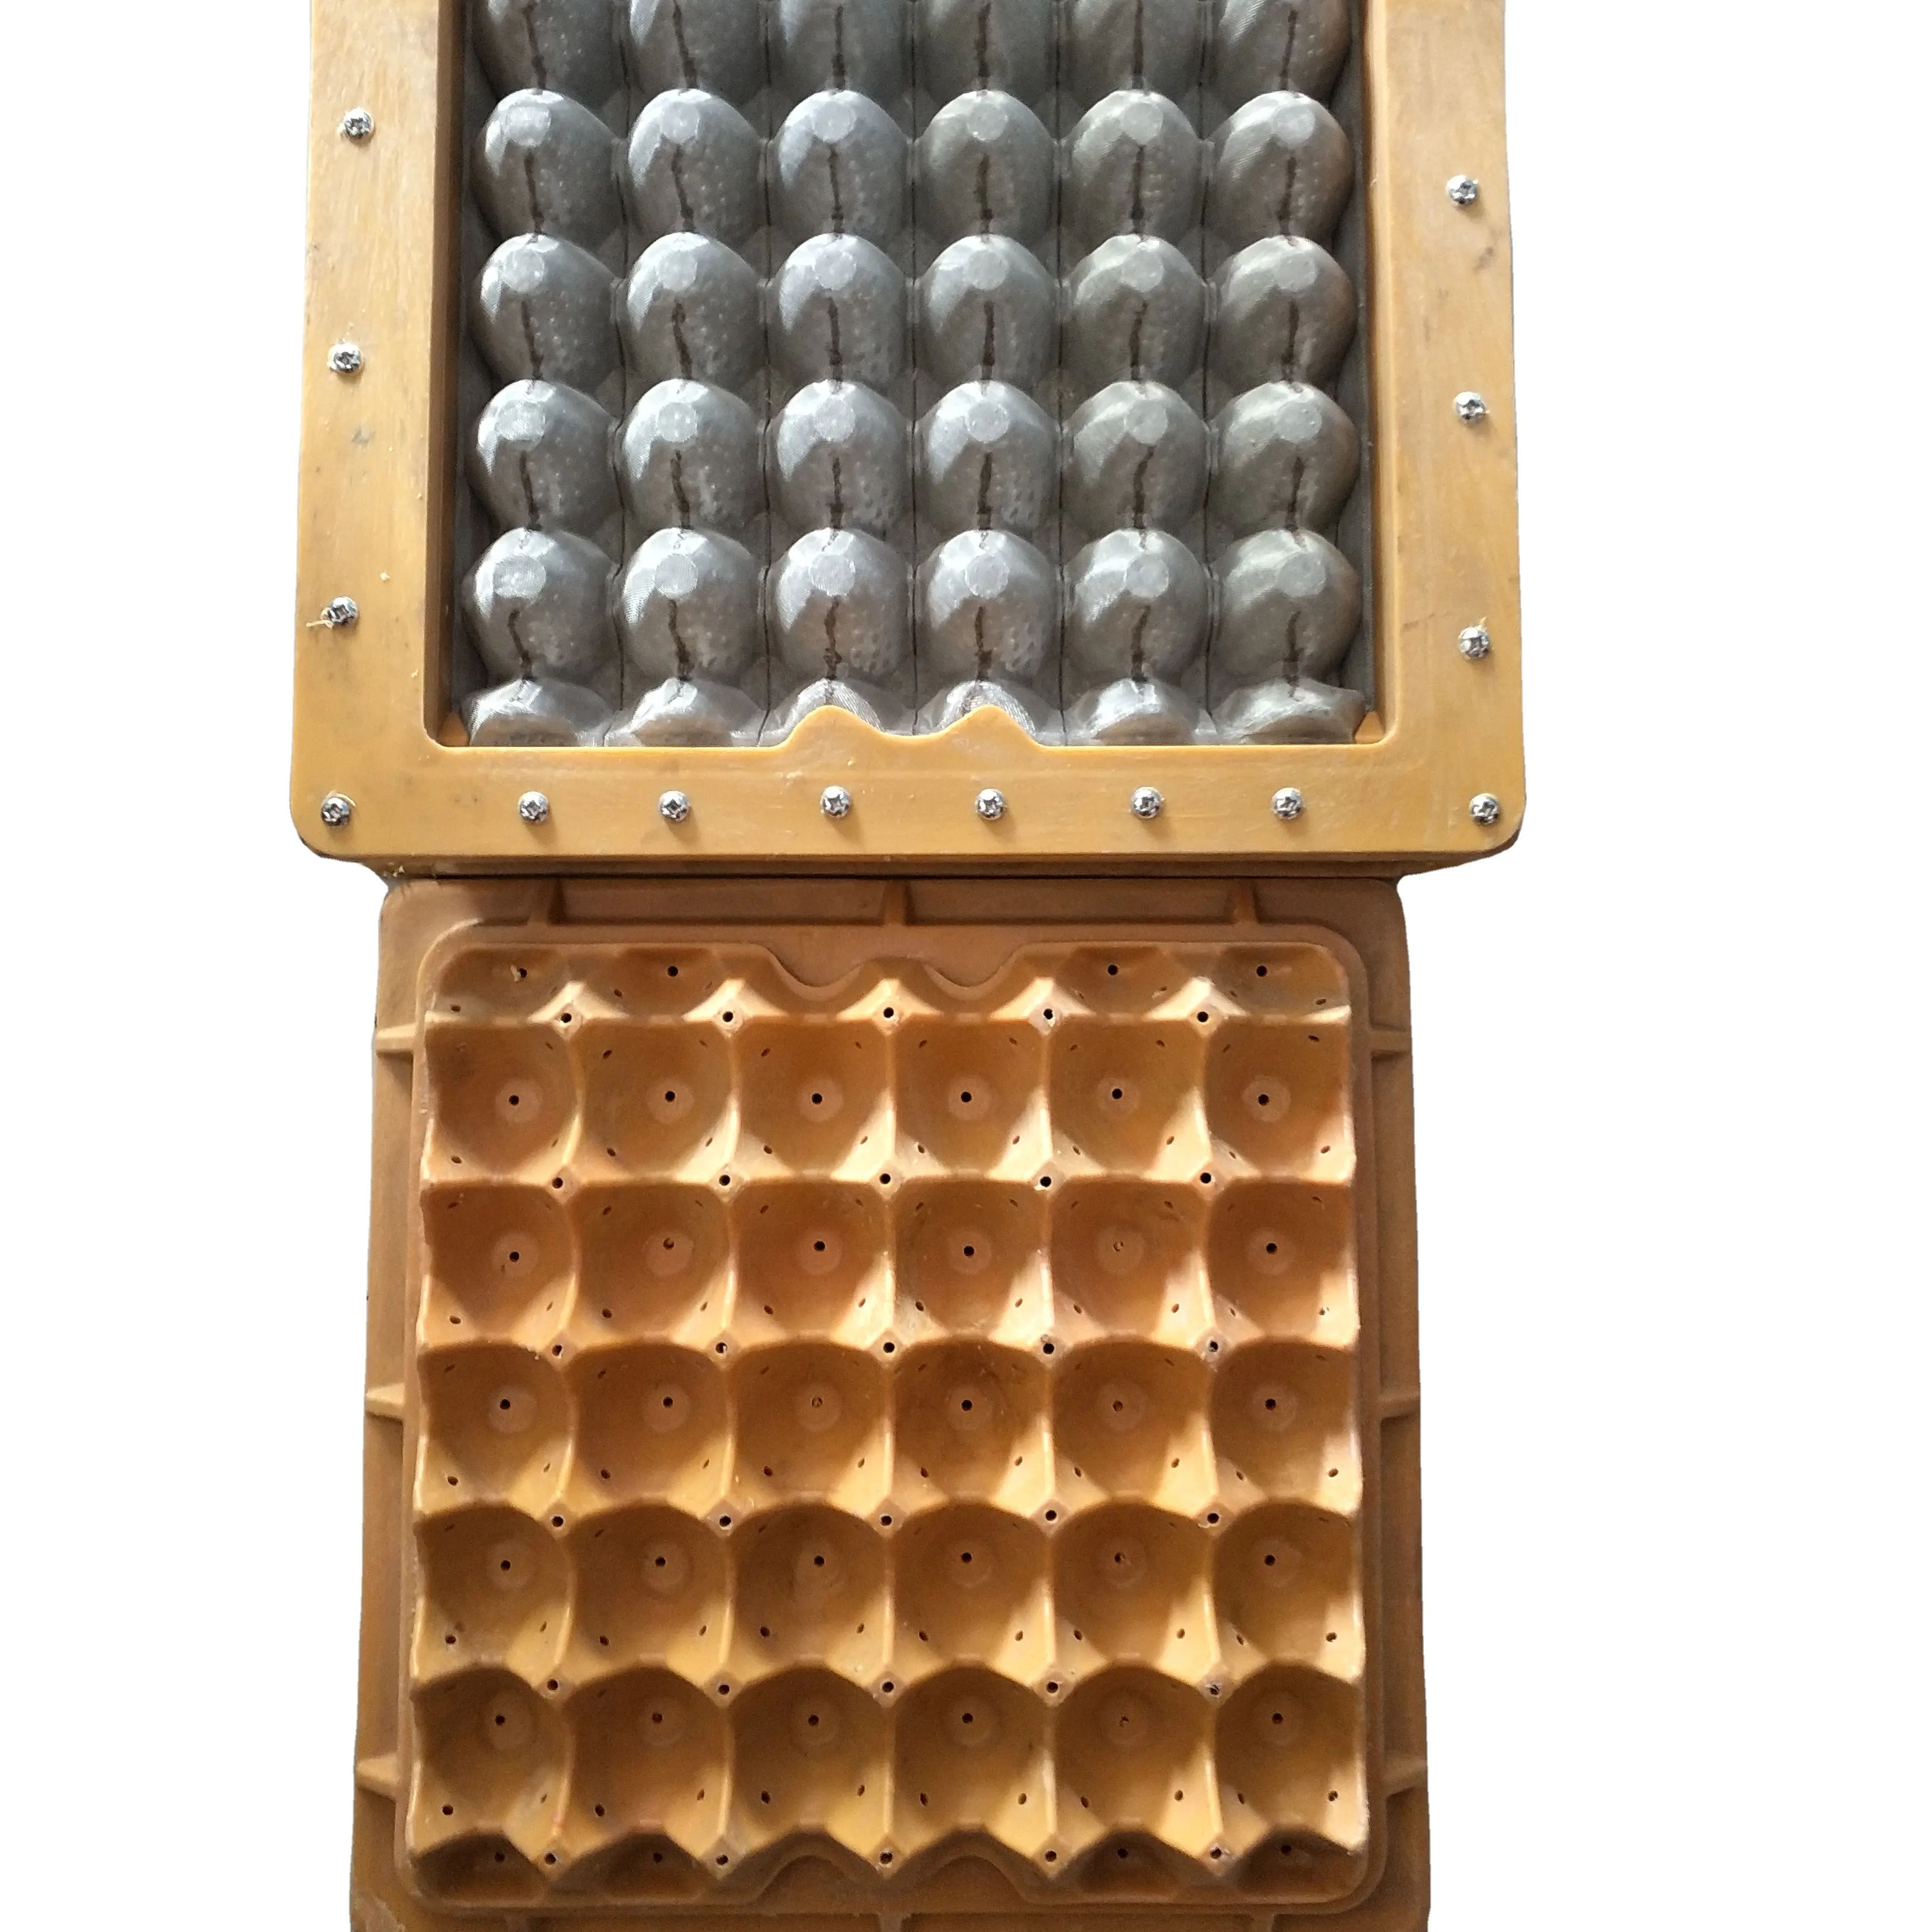 Chicken farm egg trays mold/top egg crate machinery/egg carton machinery manufacture